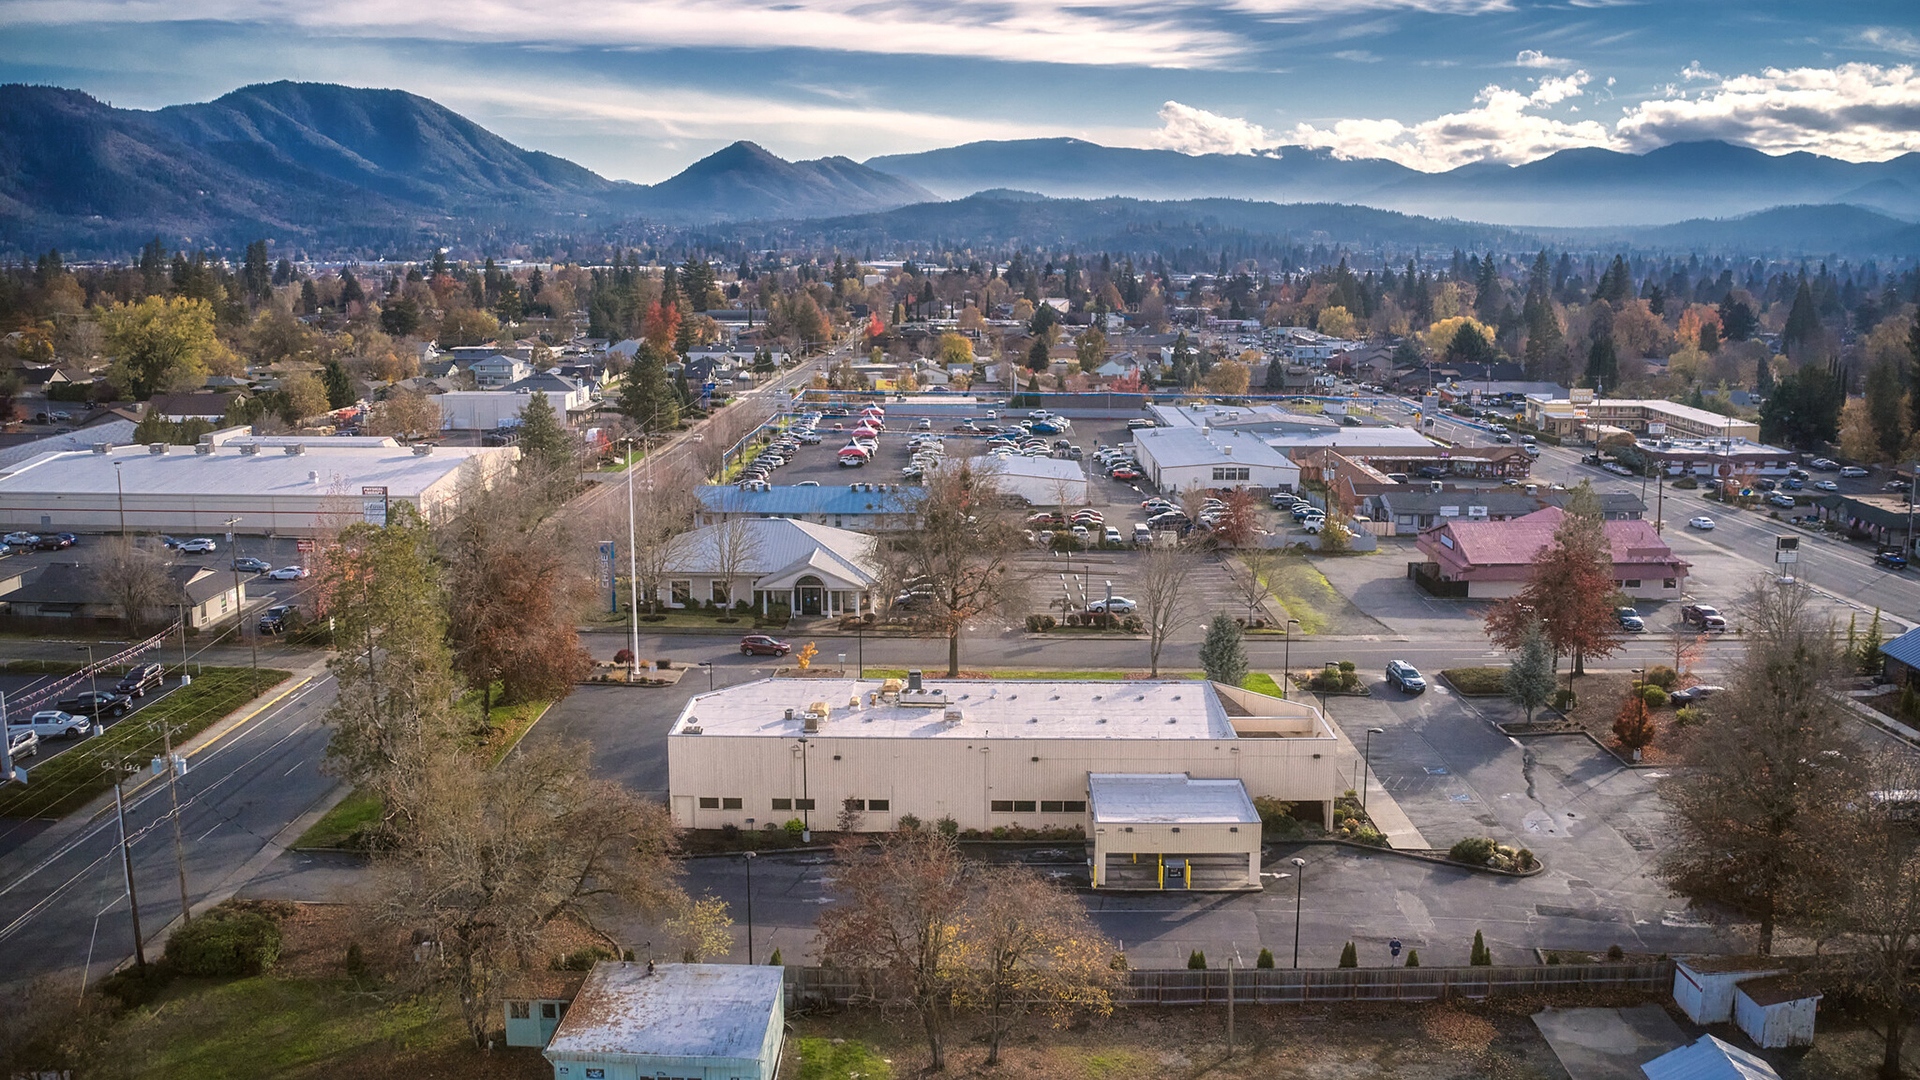 For sale - former bank building in Grants Pass